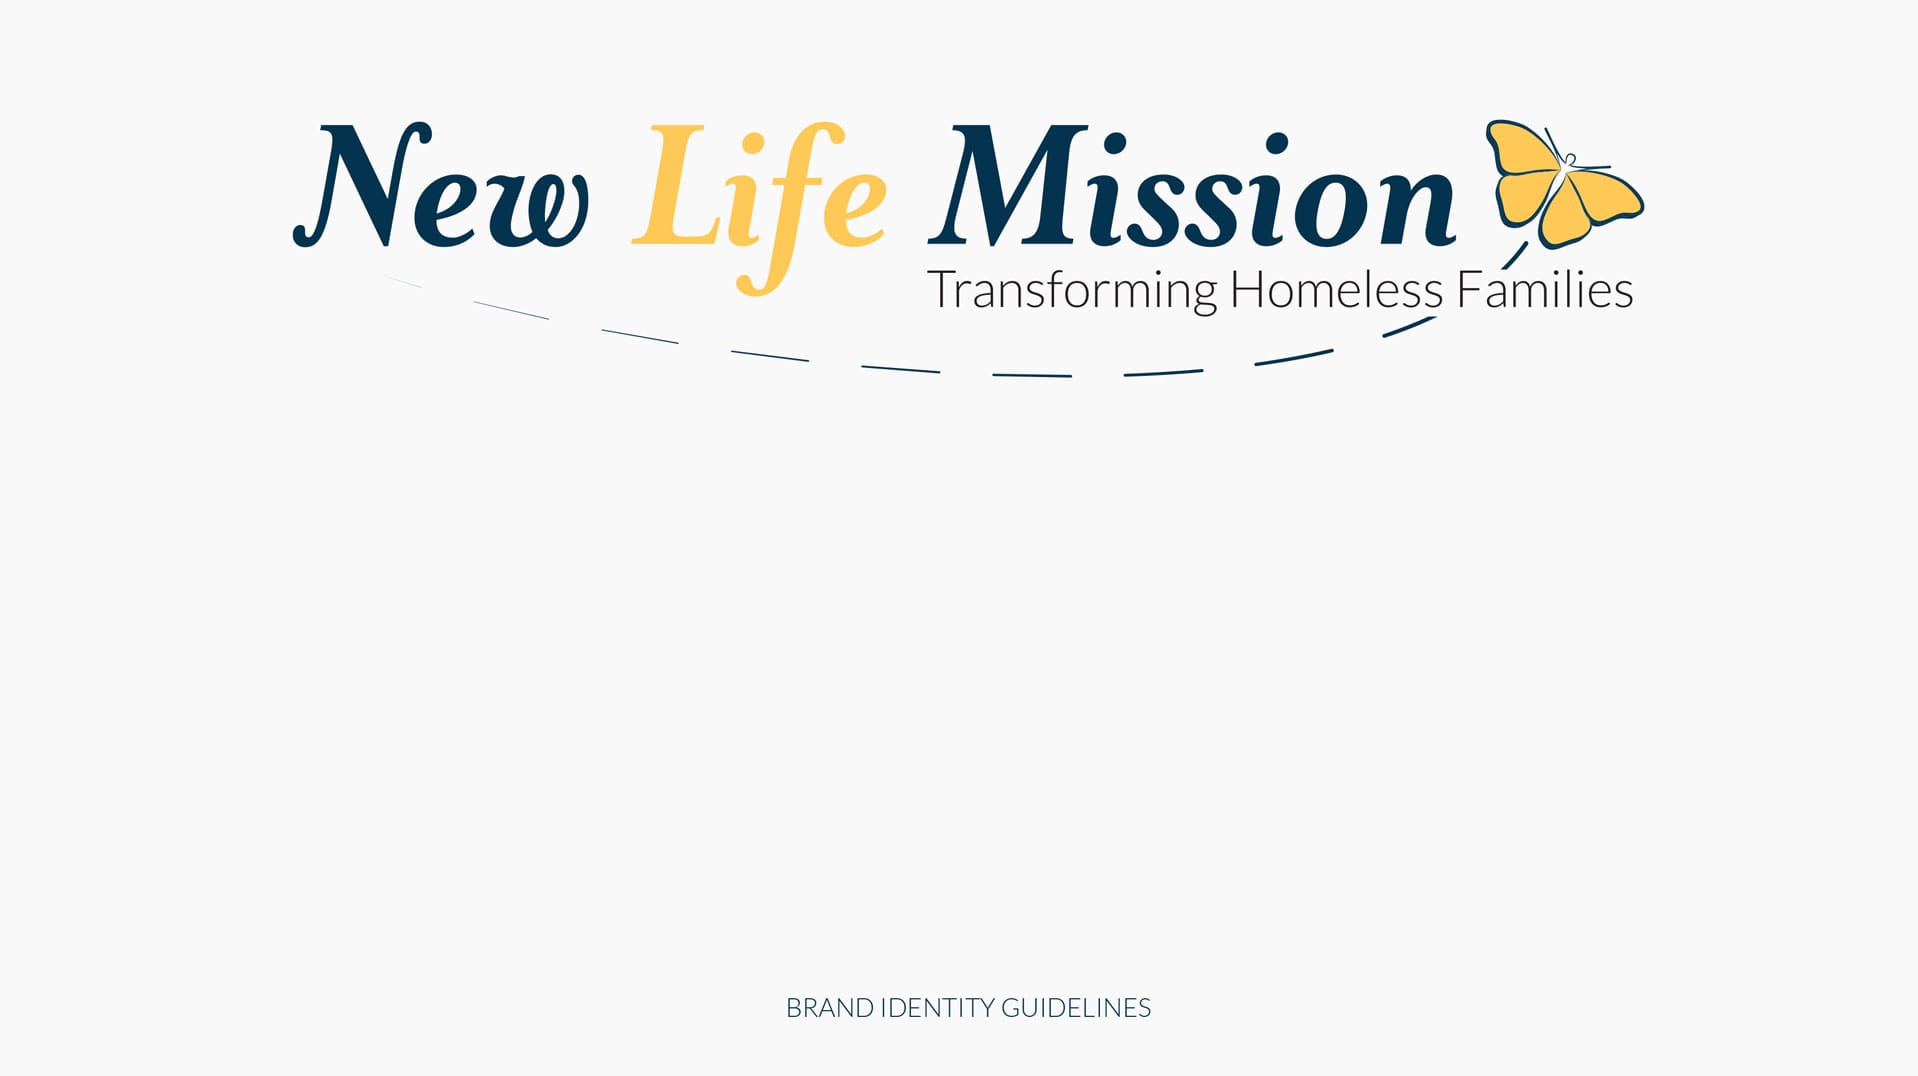 2021 Gold Addy – New Life Mission Rebrand (Space Coast AAF)